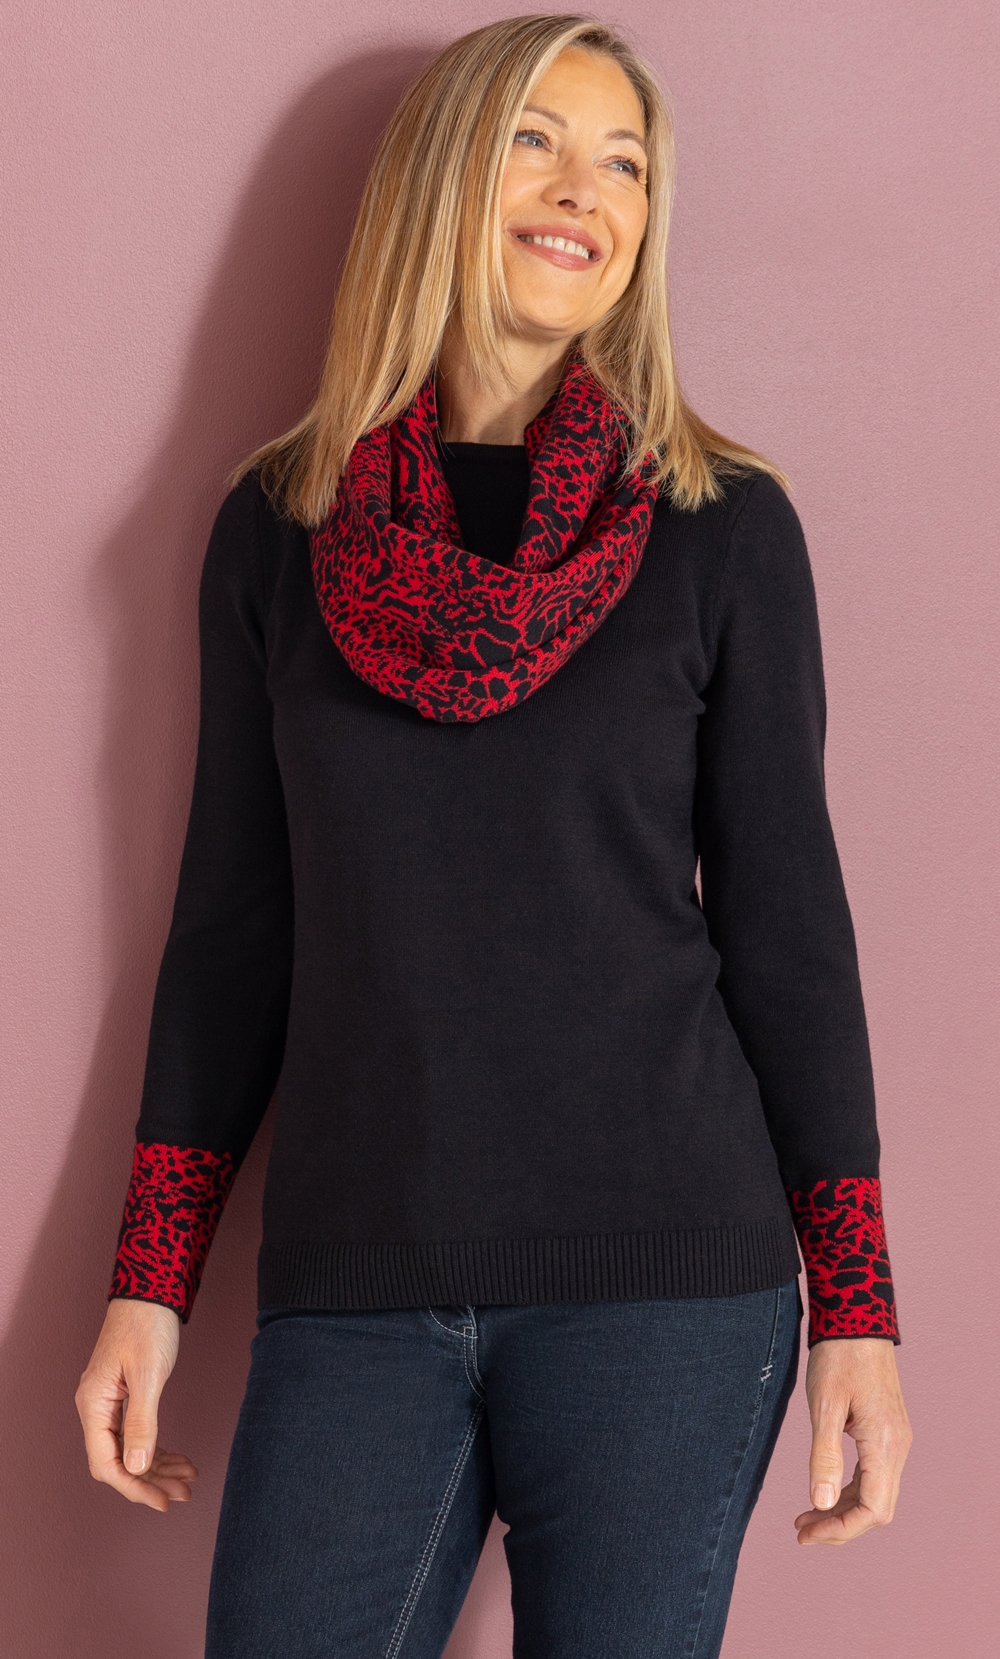 Brands - Anna Rose Anna Rose Knitted Top With Scarf Black/Red Women’s